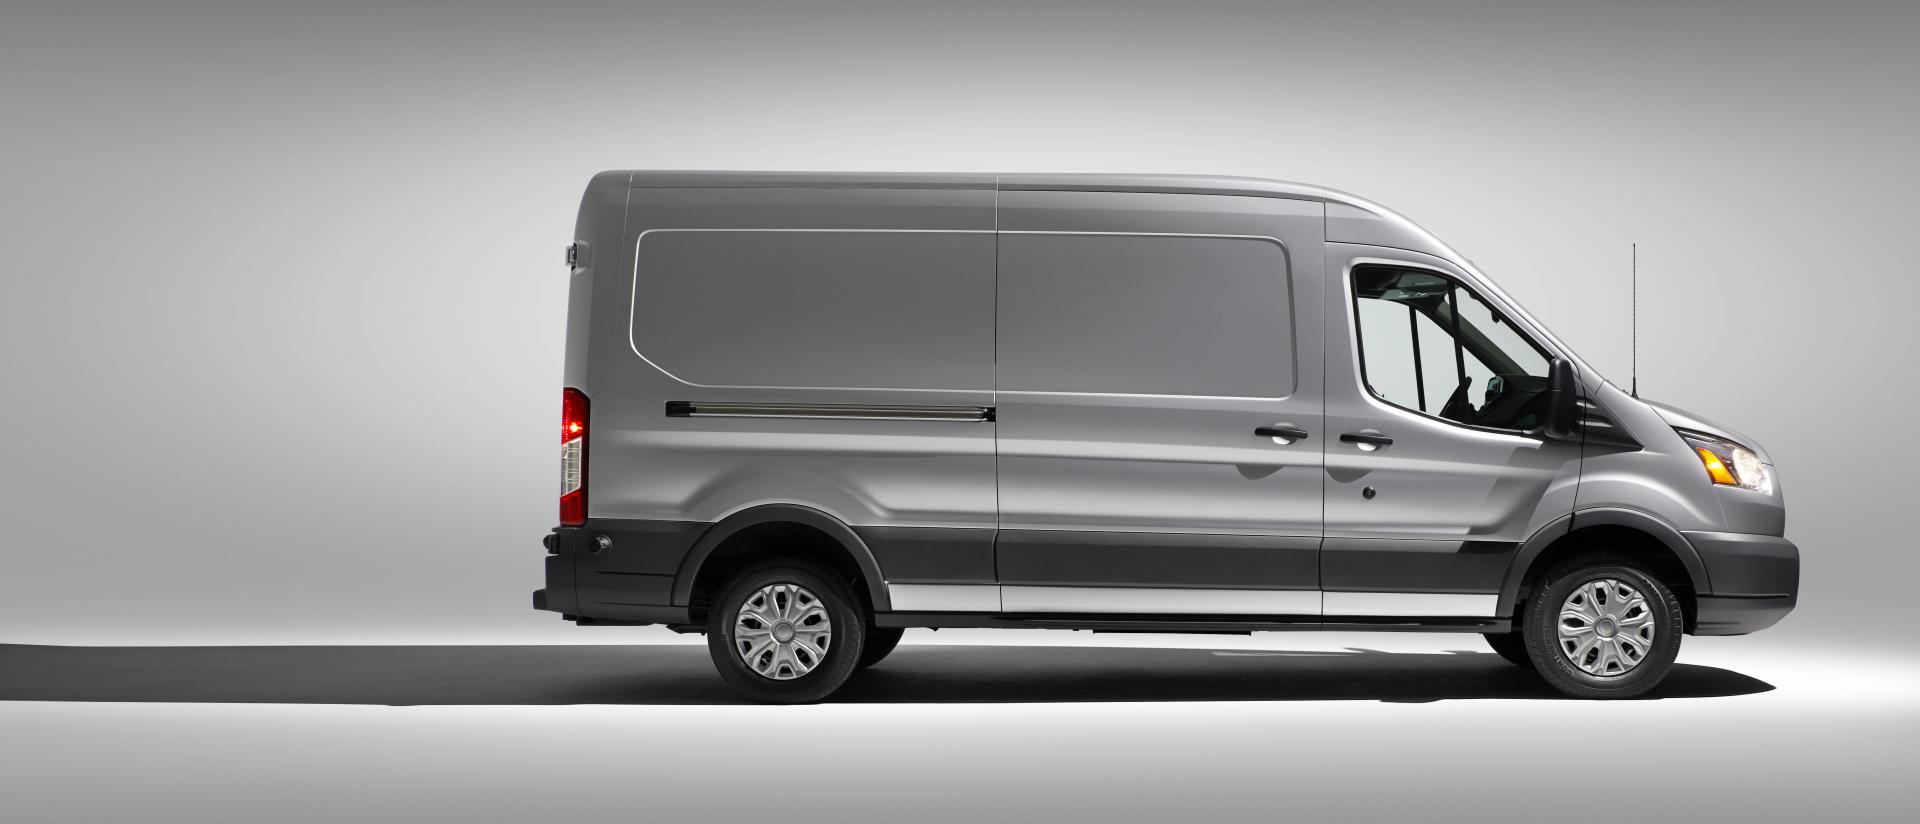 2015 Ford Transit 150 Wagon Specs Features  Options  Kelley Blue Book